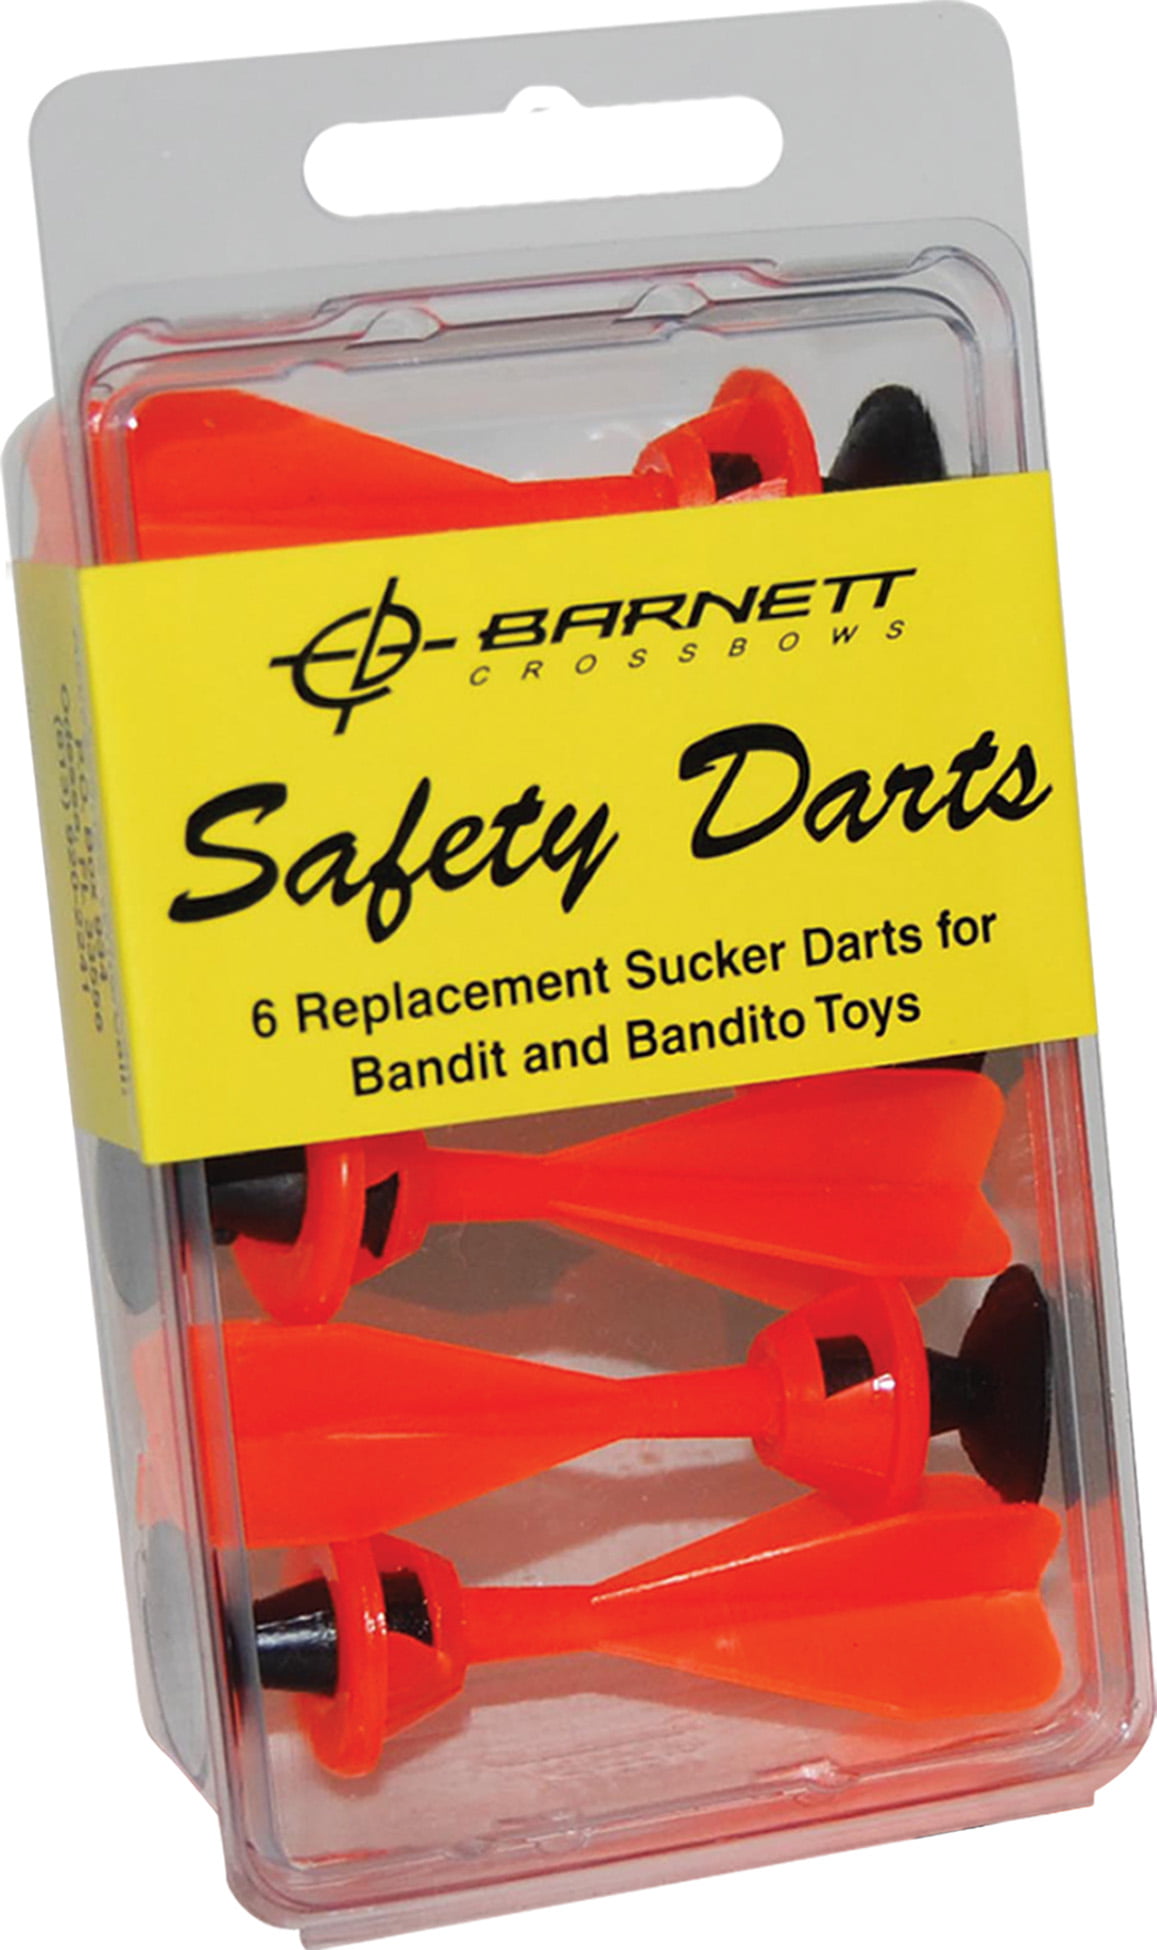 Outdoor Toy 5x Safety Replacement Sucker Dart For Bandit/Barnett Toys for Kids 